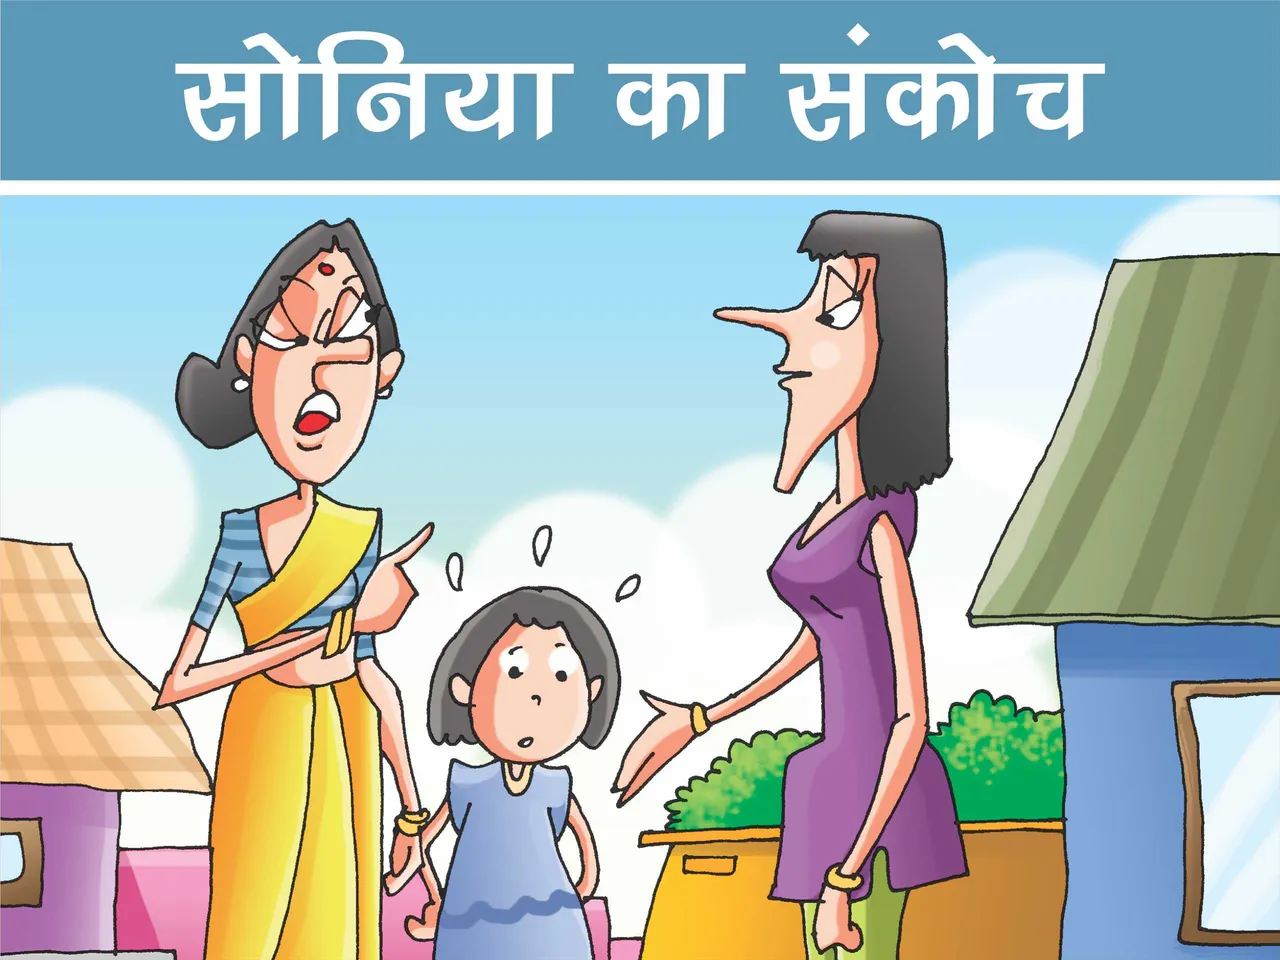 Two Women with girl Child Cartoon image